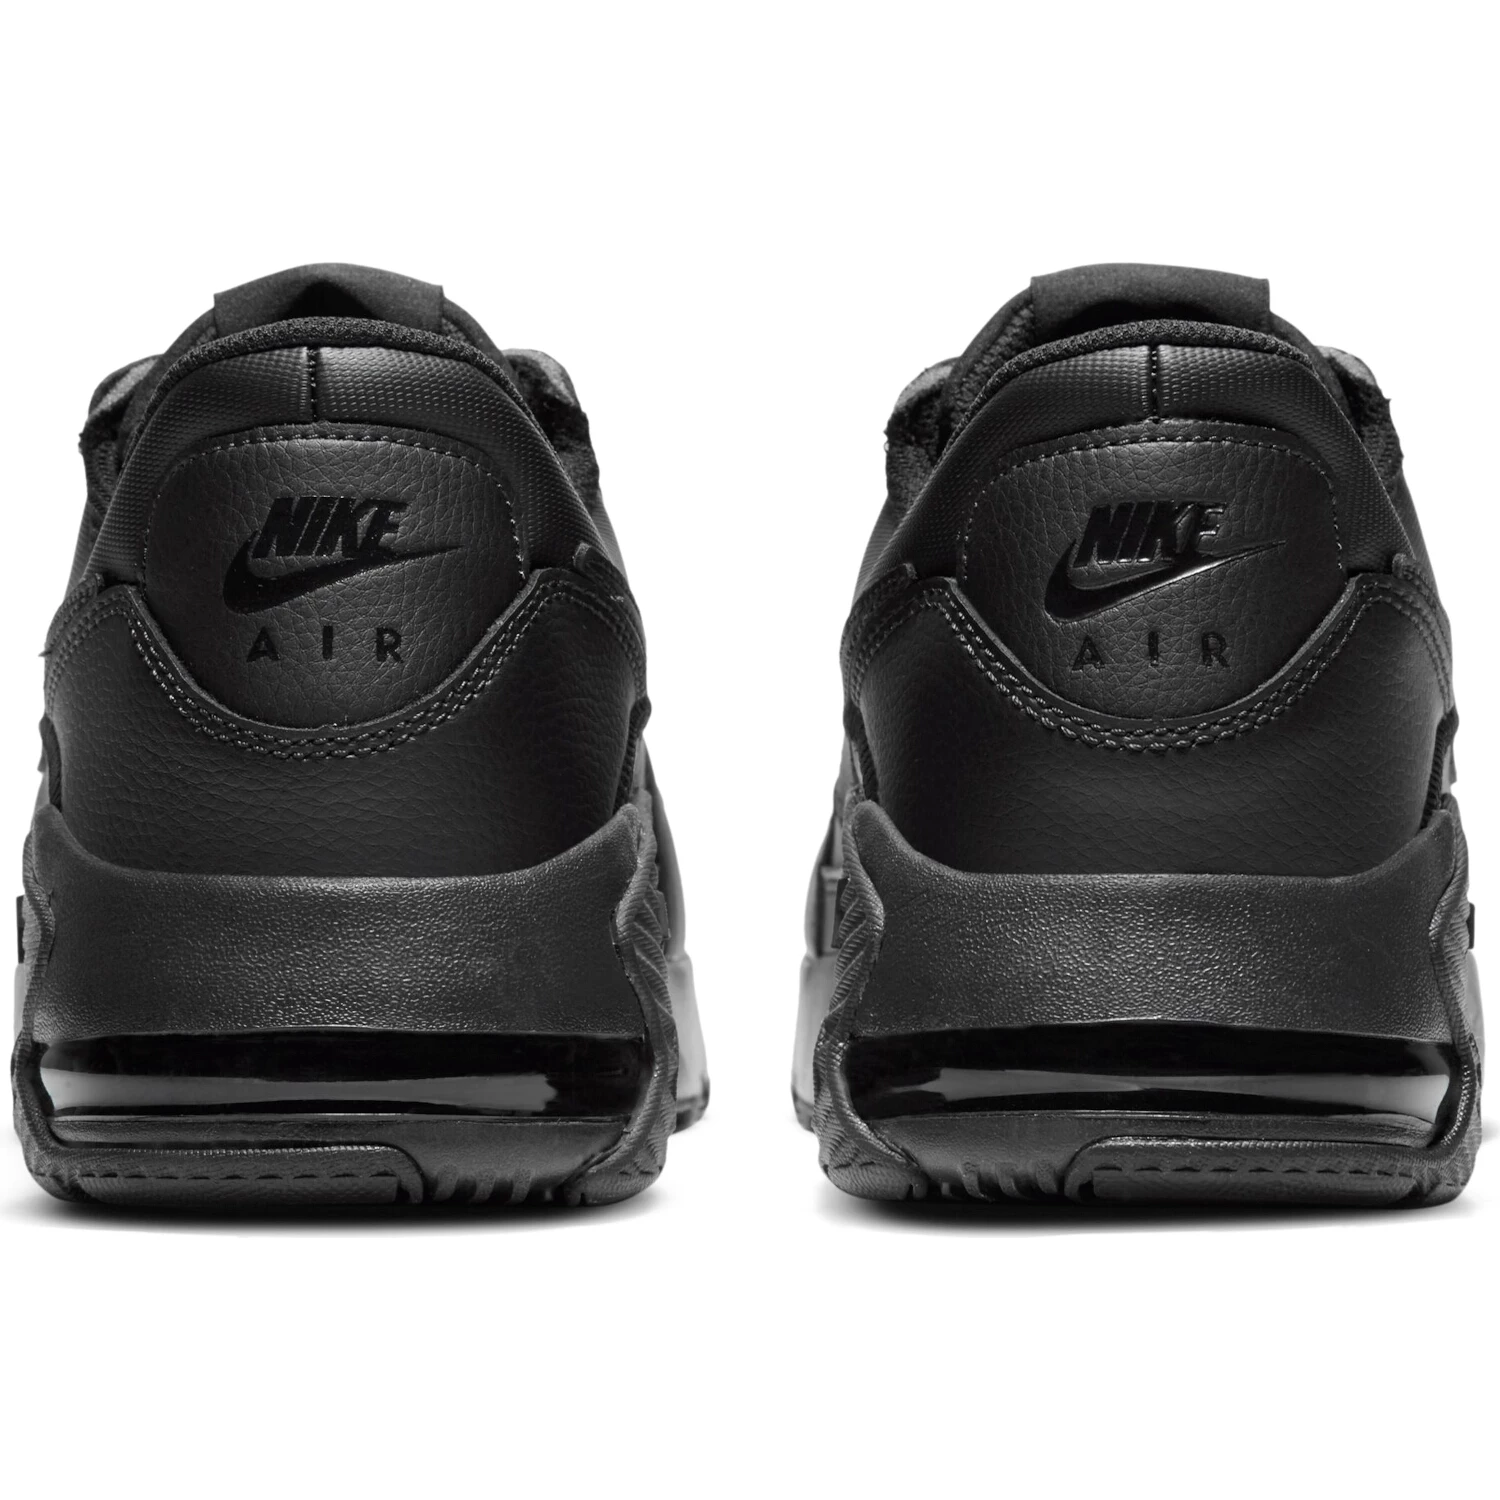 NIKE AIR MAX EXCEE LEATHER SCHOENEN DB2839-001 wbsport.nl